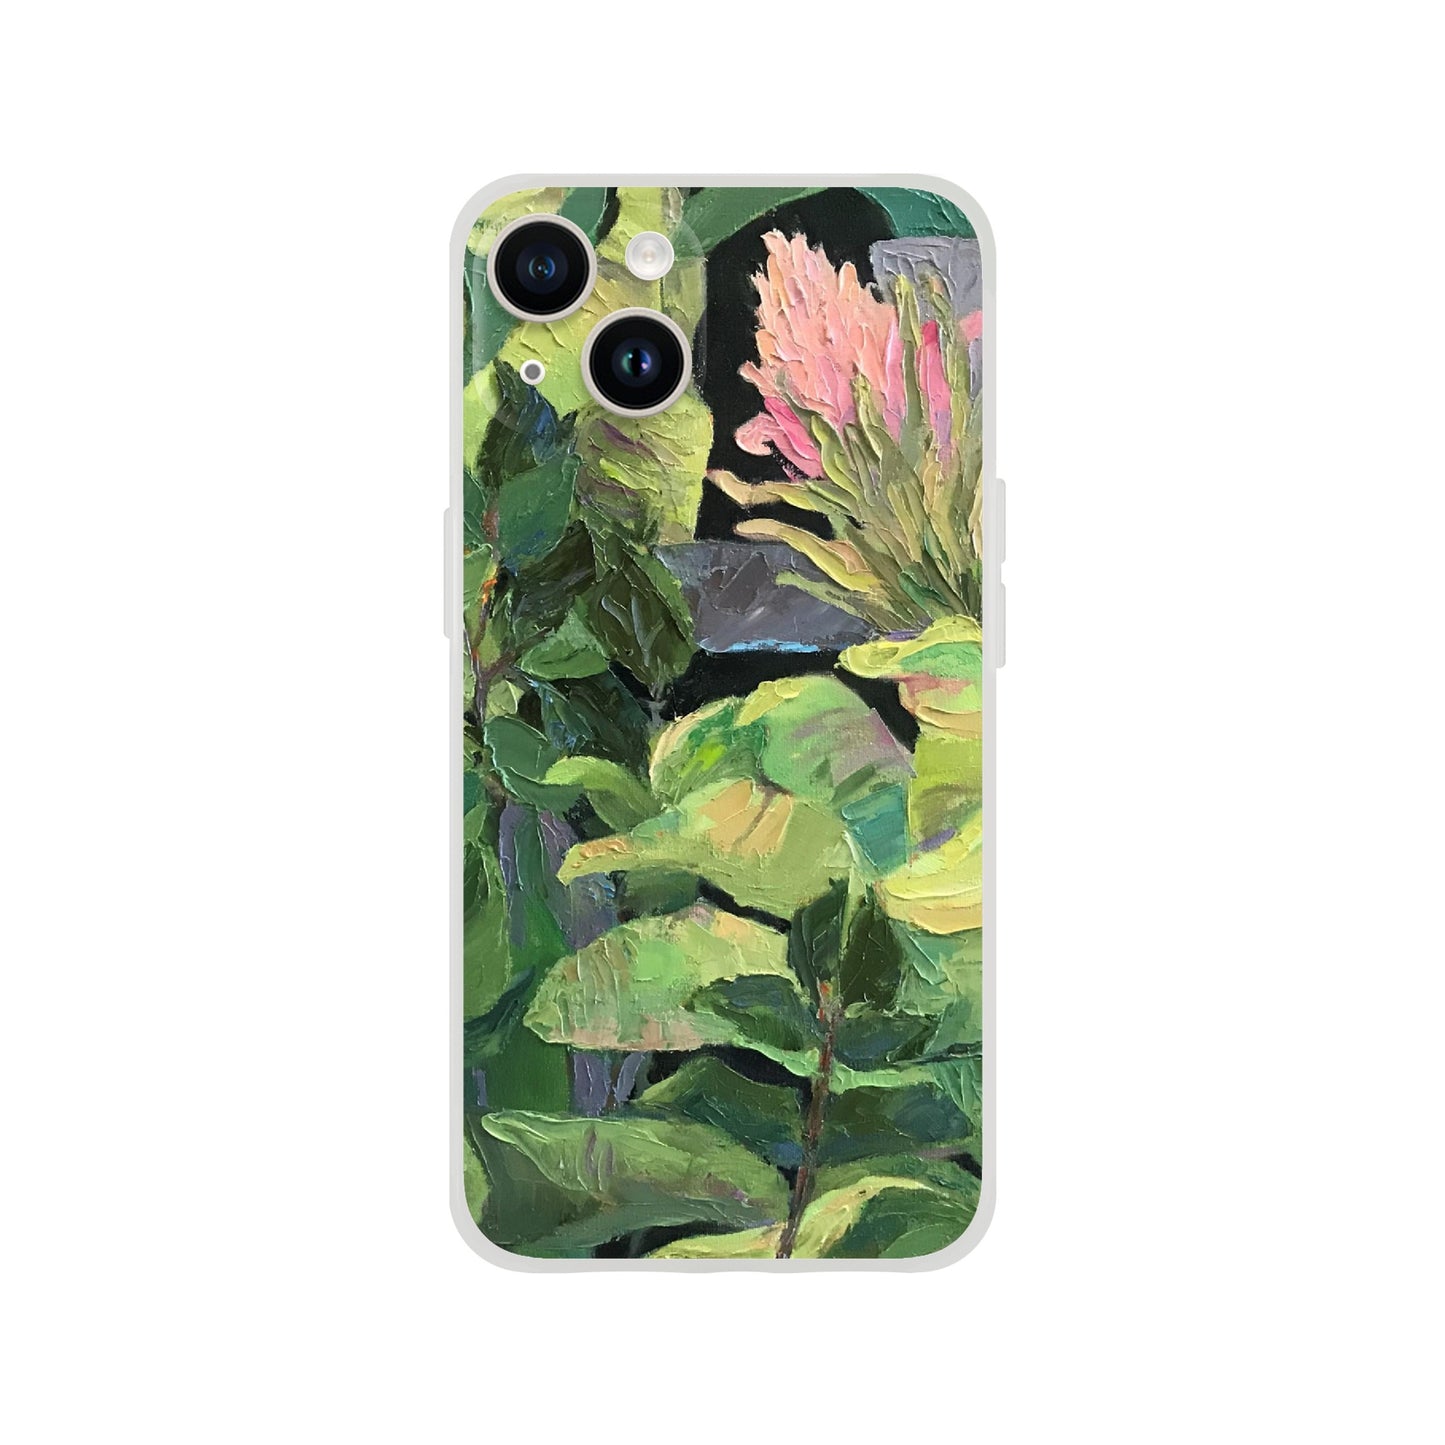 "Bromeliad" Flexi Phone Case for Iphone or Samsung by Barbara Cleary Designs